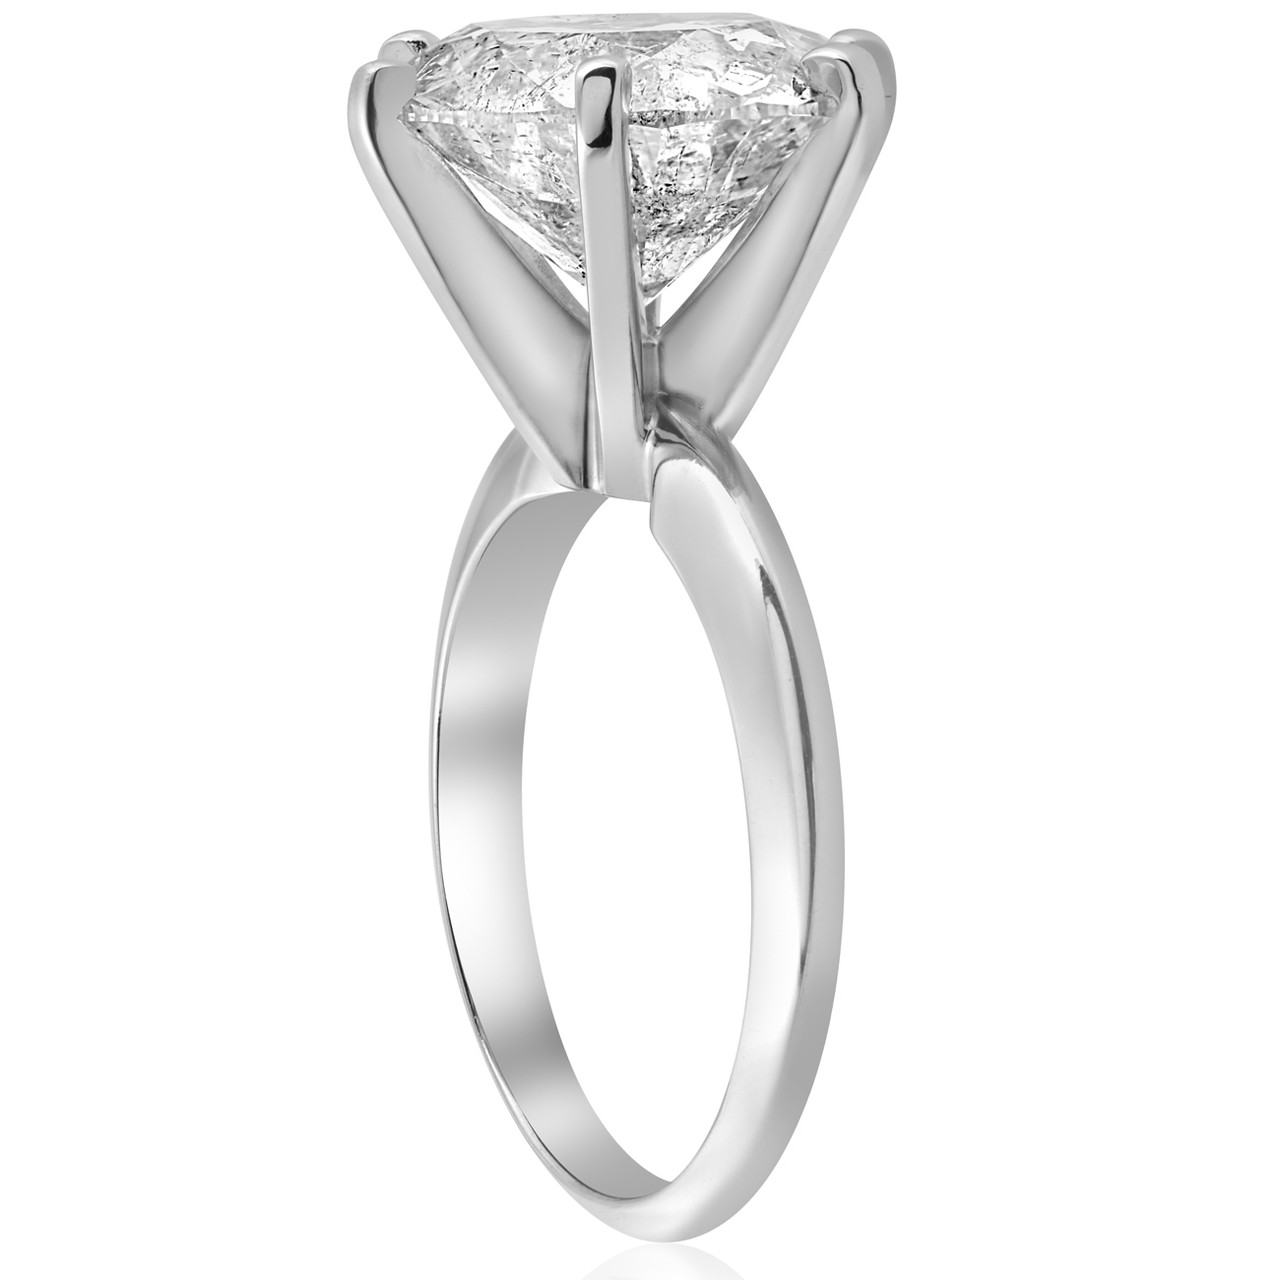 Certified 10.83Ct Natural Round Brilliant Cut Diamond Solitaire